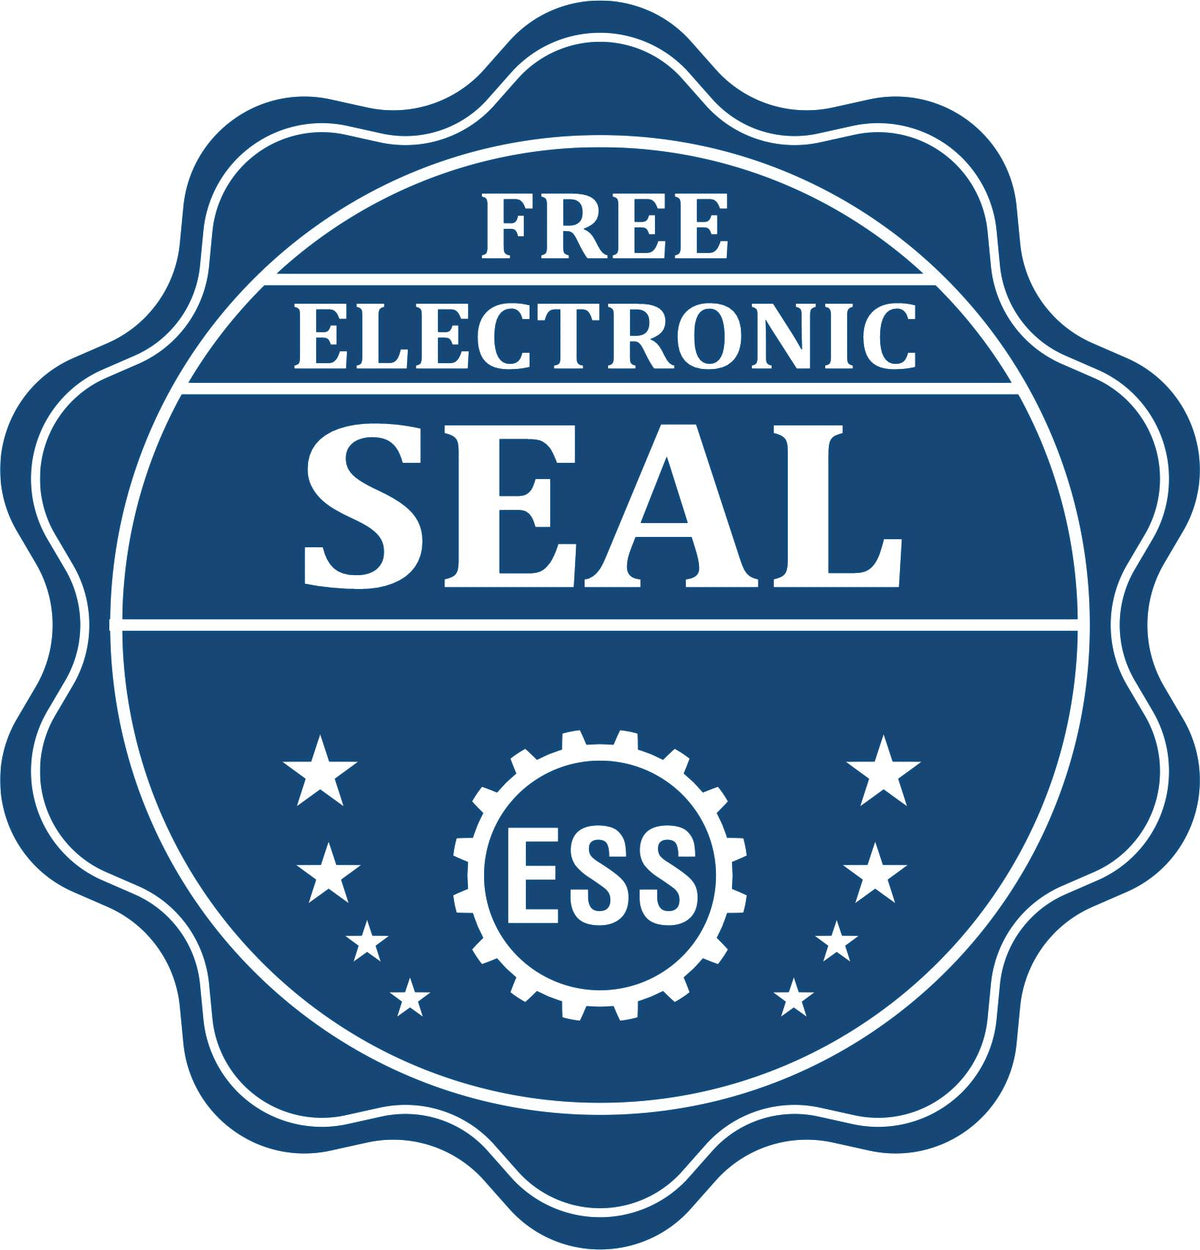 A badge showing a free electronic seal for the Hybrid Massachusetts Landscape Architect Seal with stars and the ESS gear on the emblem.